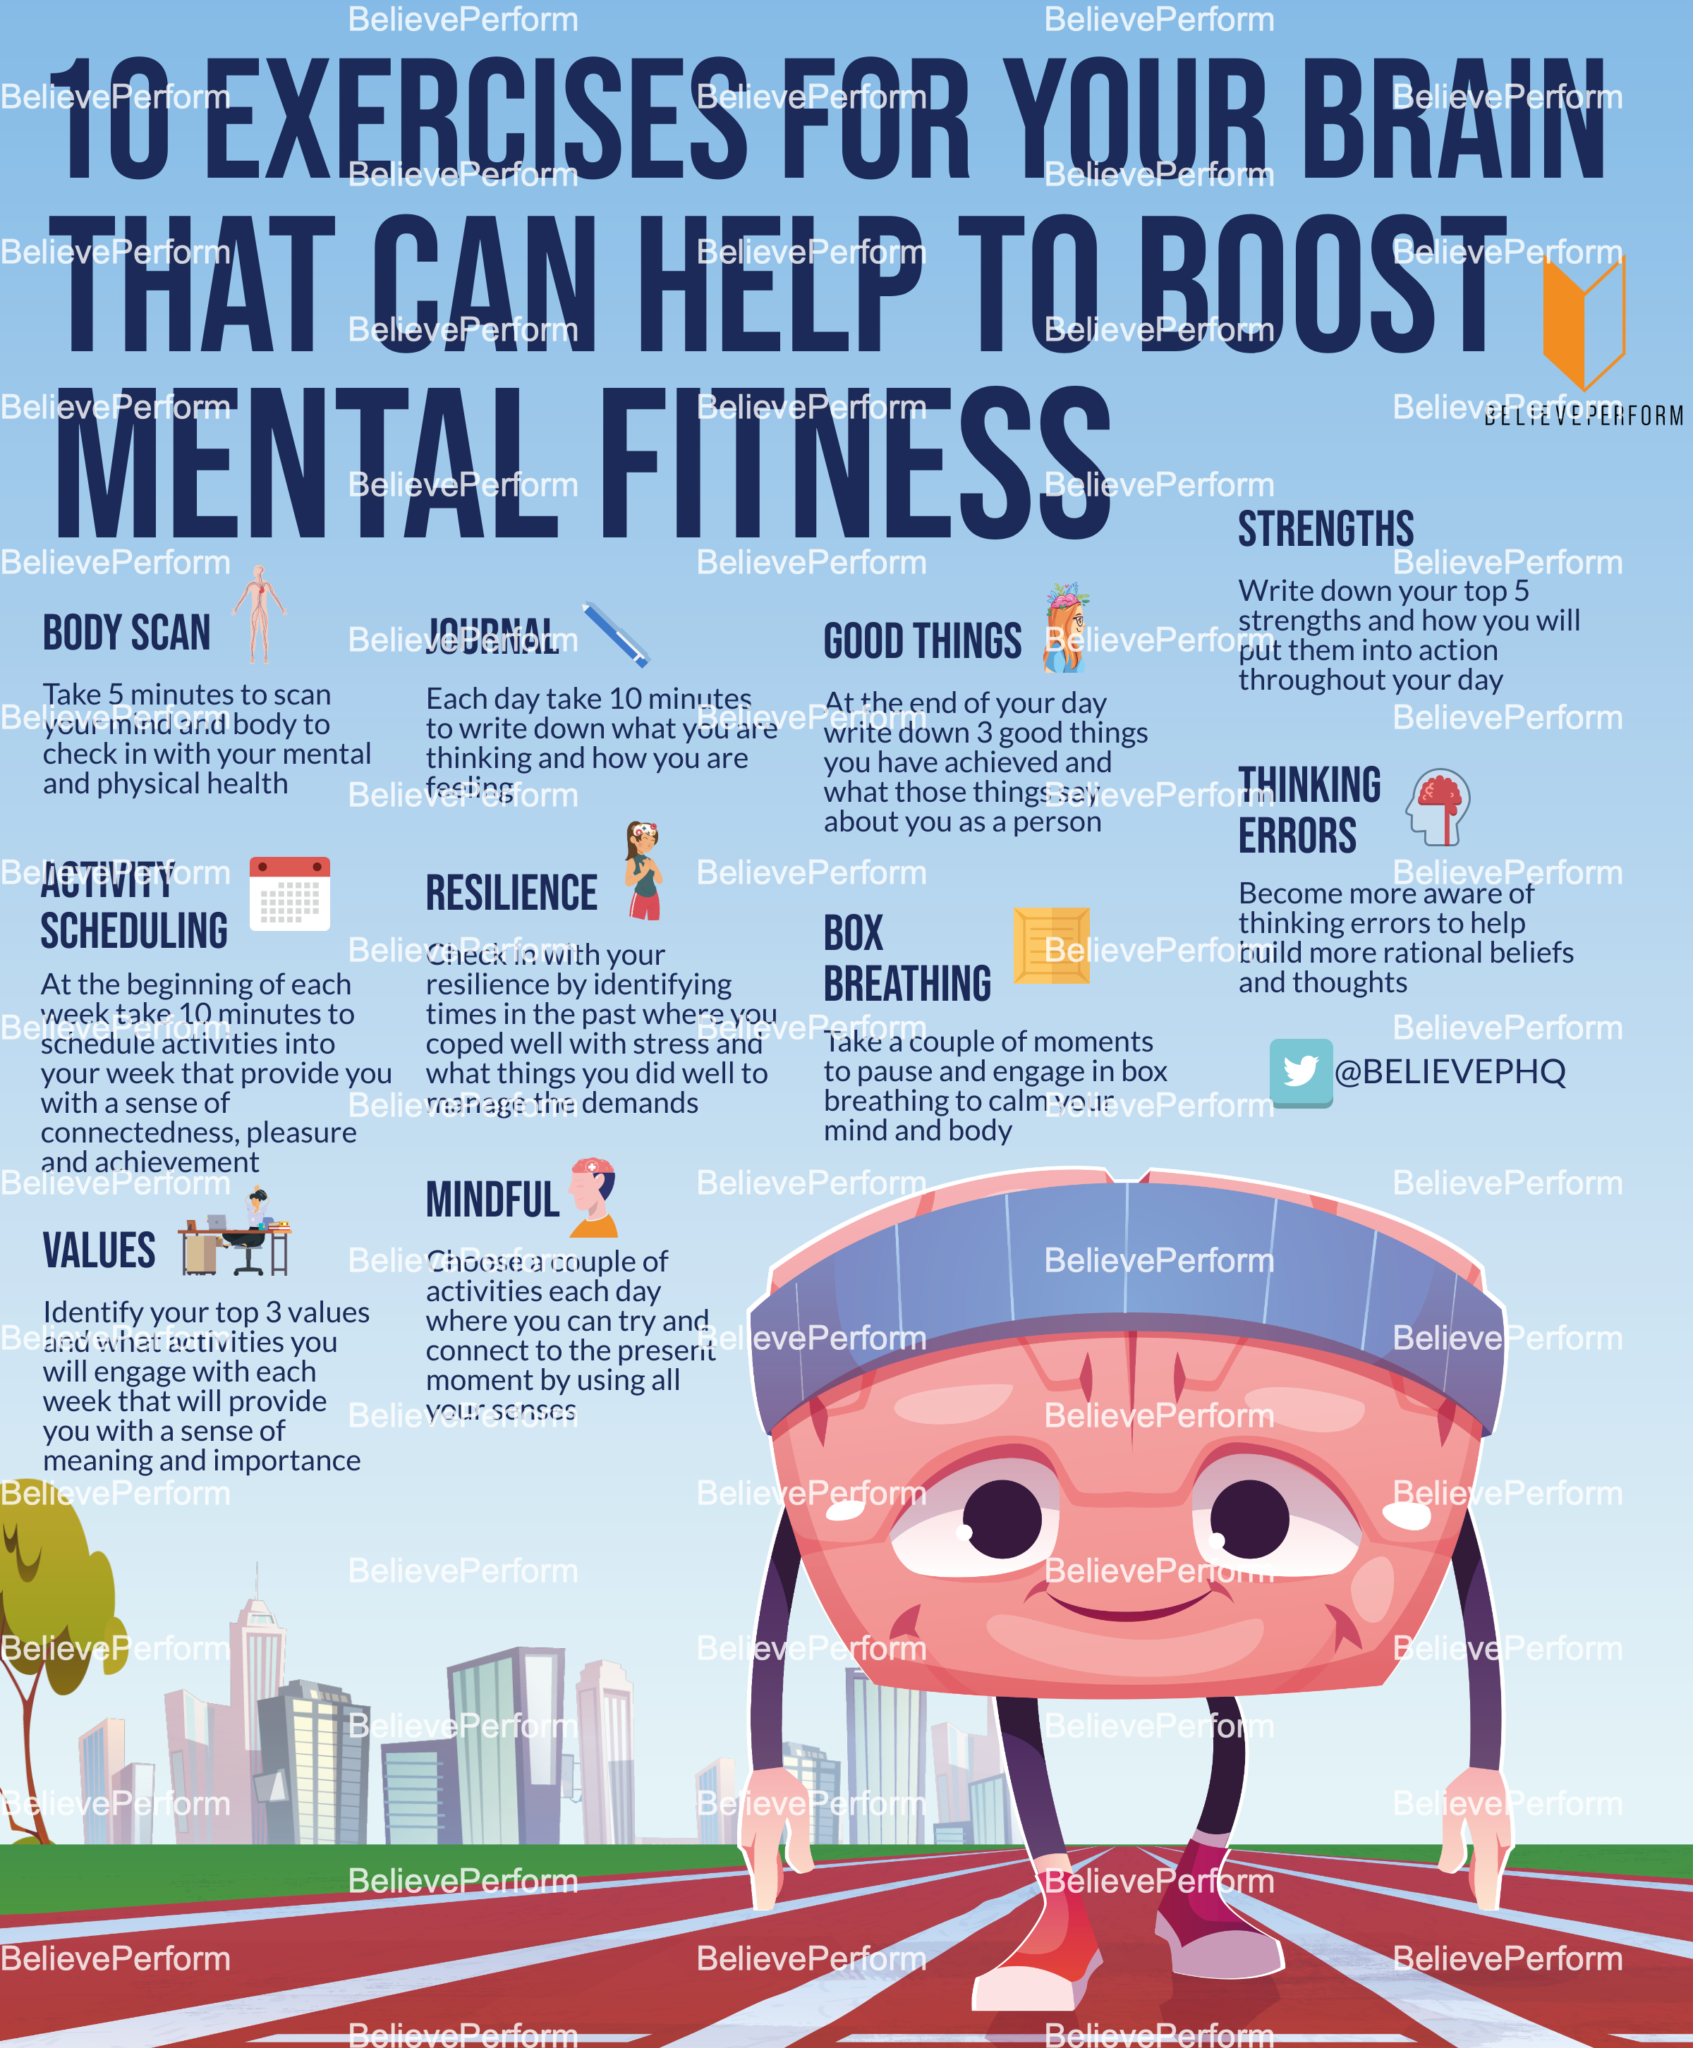 10-exercises-for-your-brain-that-can-help-to-boost-mental-fitness